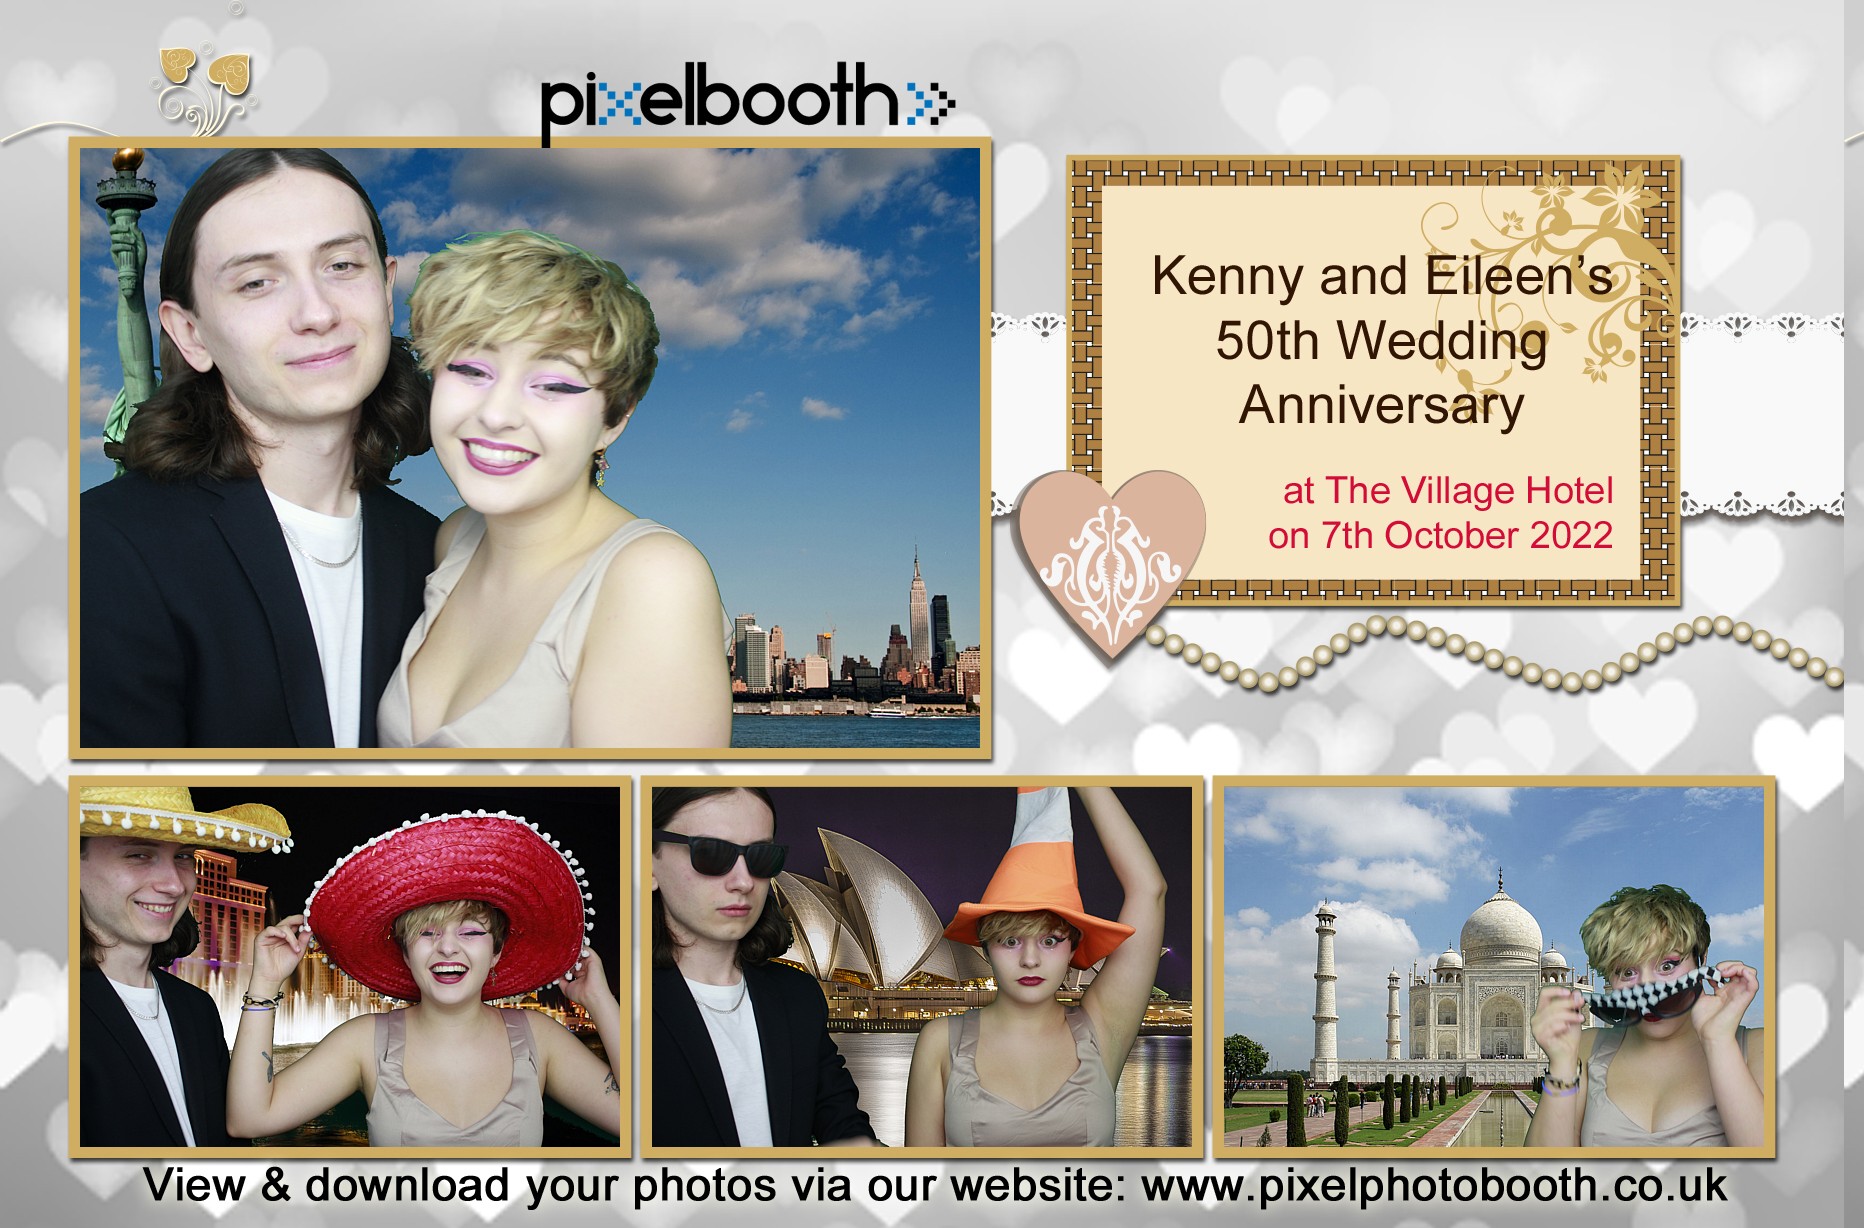 7th Oct 2022: Kenny and Eileen's 50th Wedding Anniversary at The Village Hotel in Bromborough